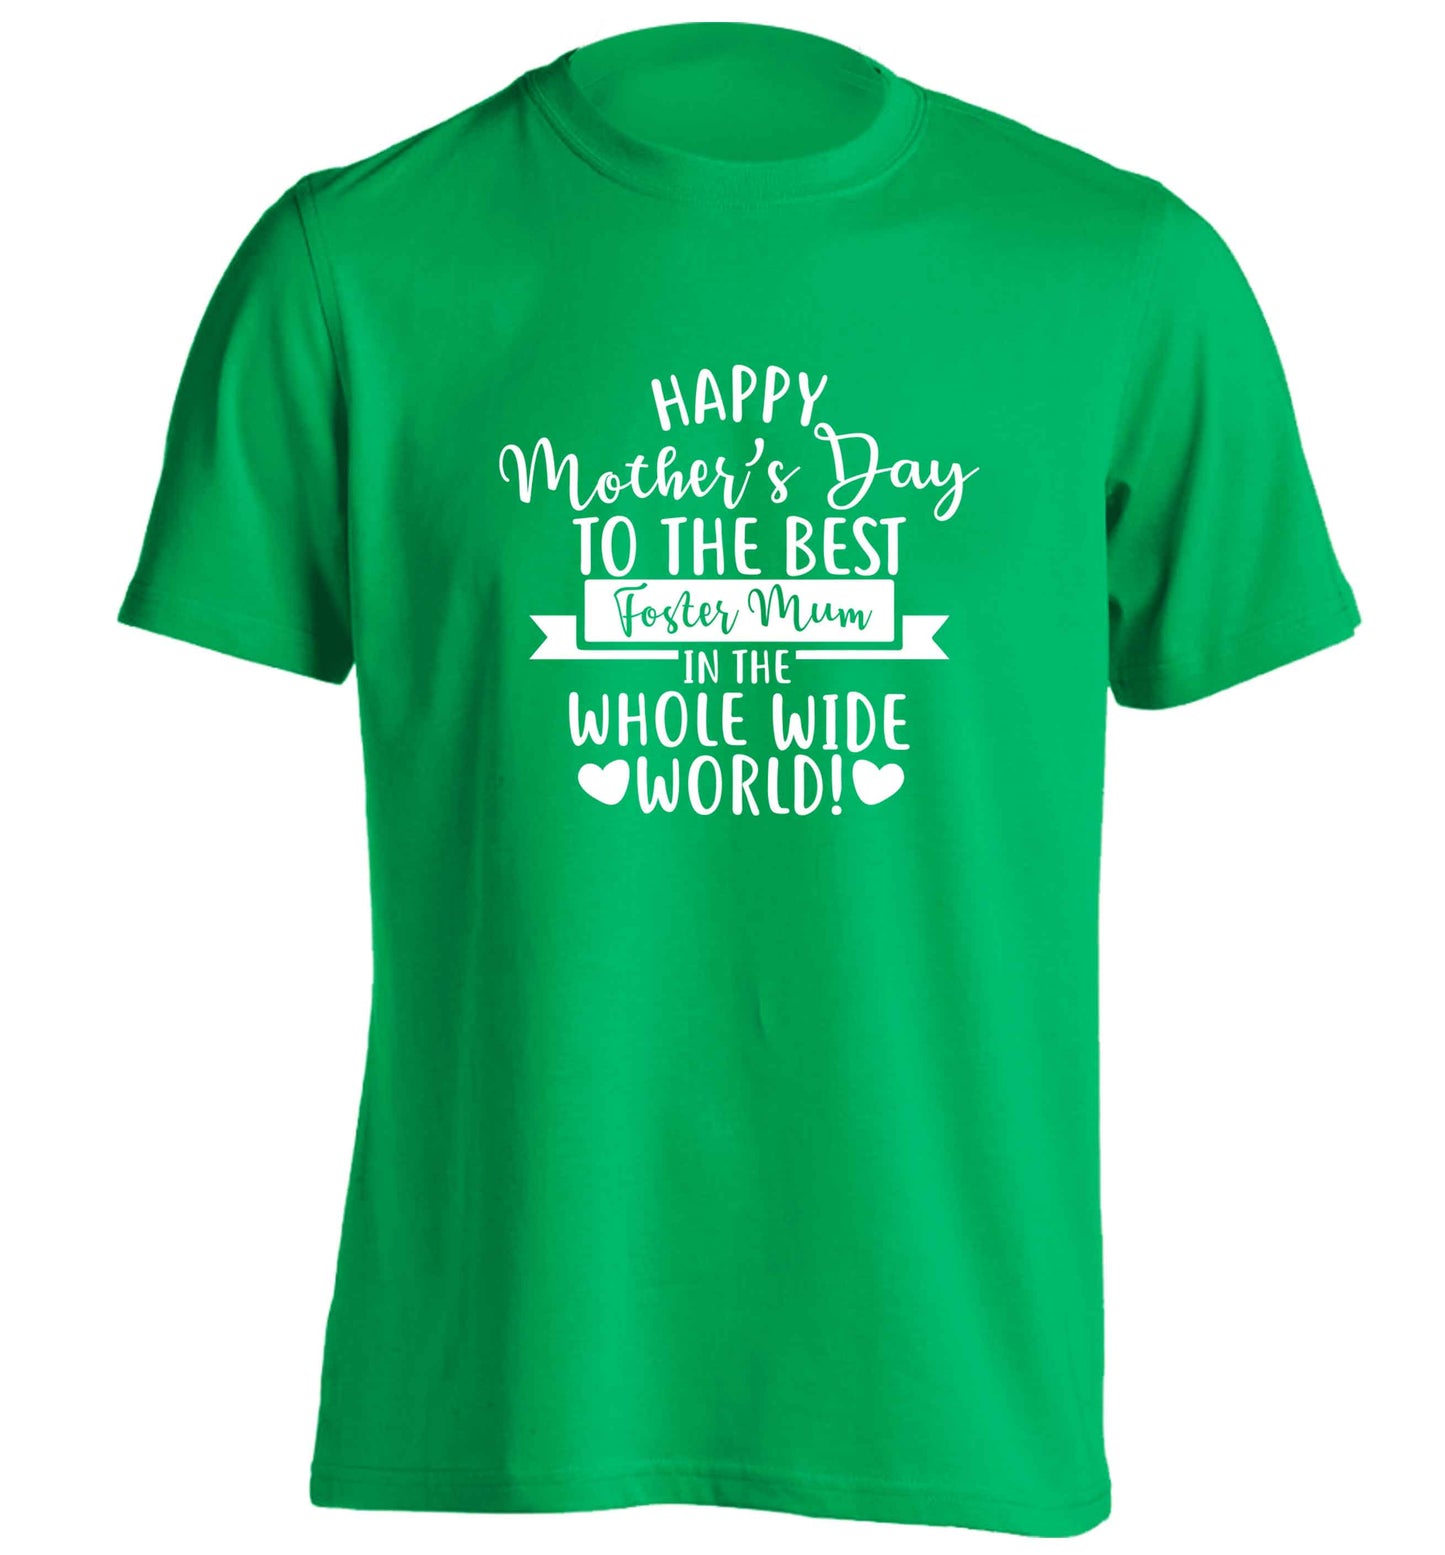 Happy mother's day to the best foster mum in the world adults unisex green Tshirt 2XL